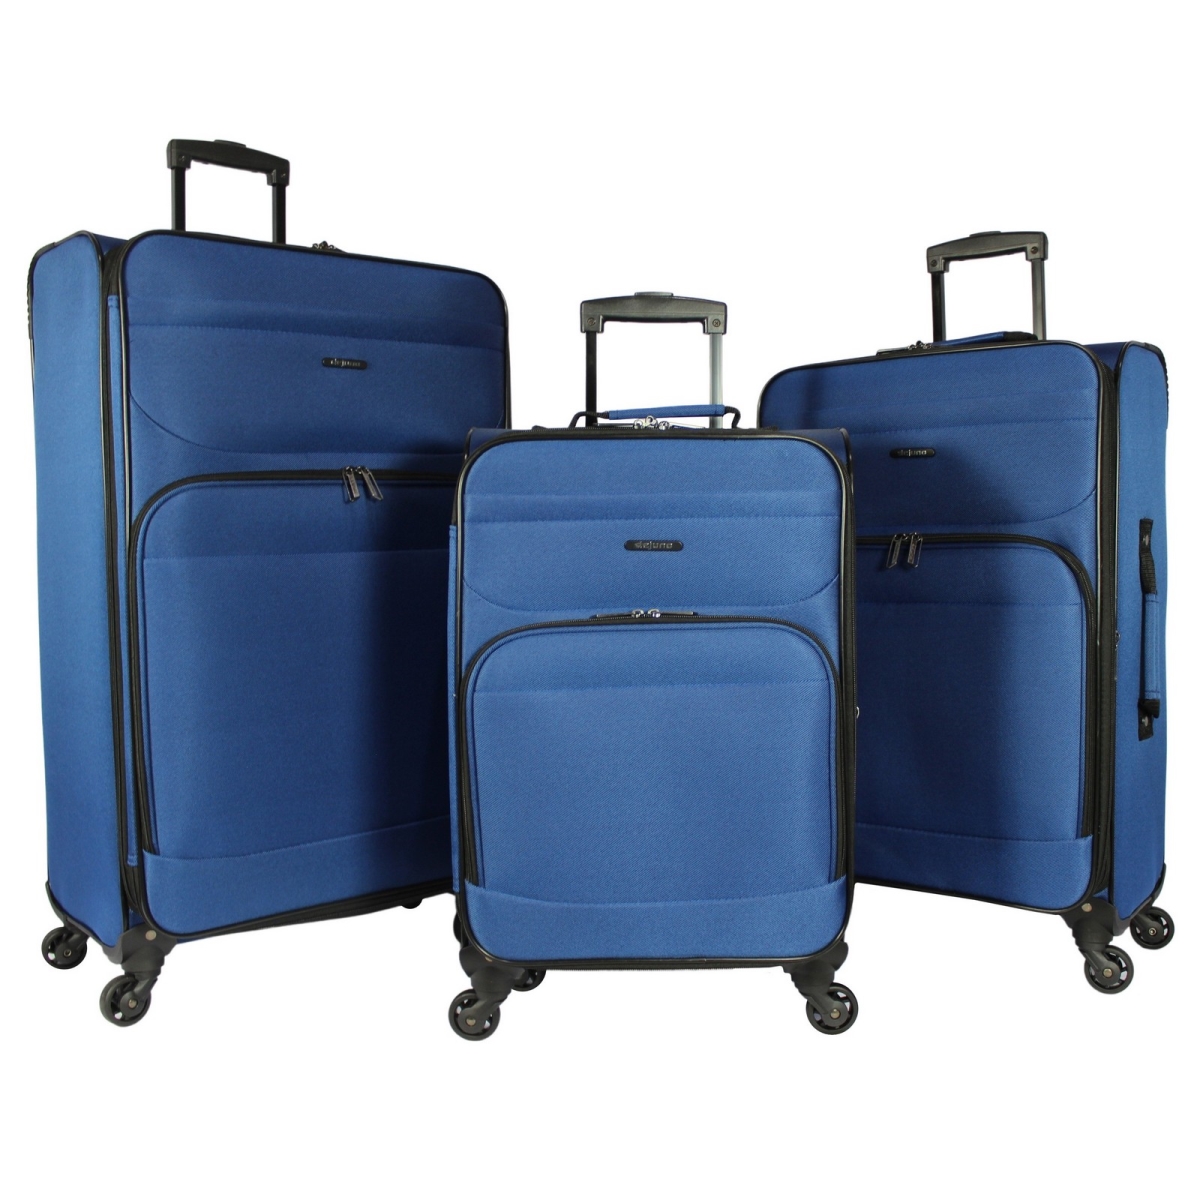 Picture of Dejuno 252104DJ-NAVY Lisbon Lightweight Expandable Spinner Luggage Set, Navy - 3 Piece